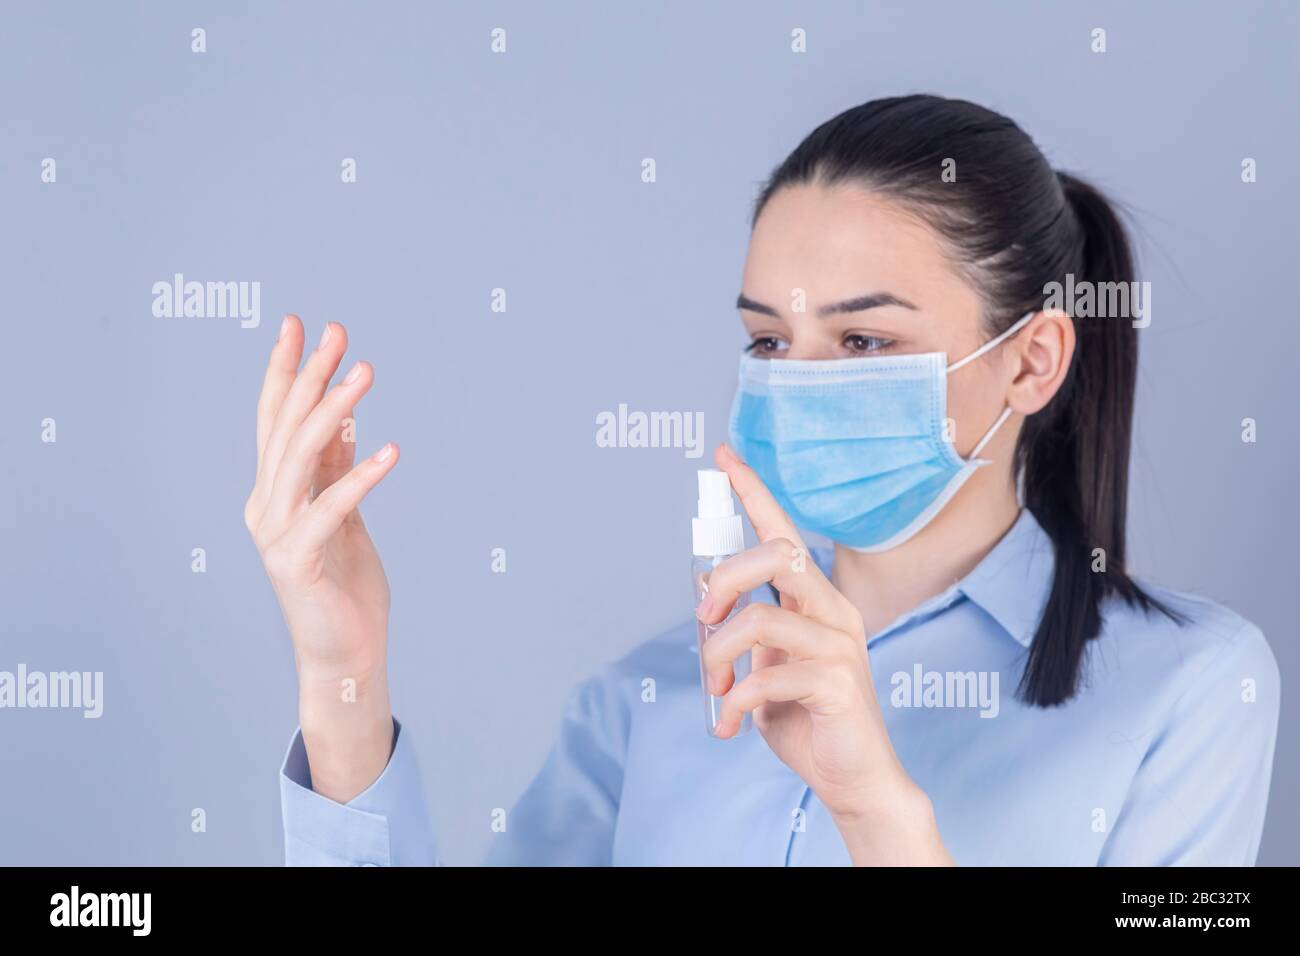 COVID-19 Pandemic Coronavirus. Girl with protective mask holdding alcohol spray cleaning protect disease covid 19. Antiseptic, Hygiene and Healthcare Stock Photo